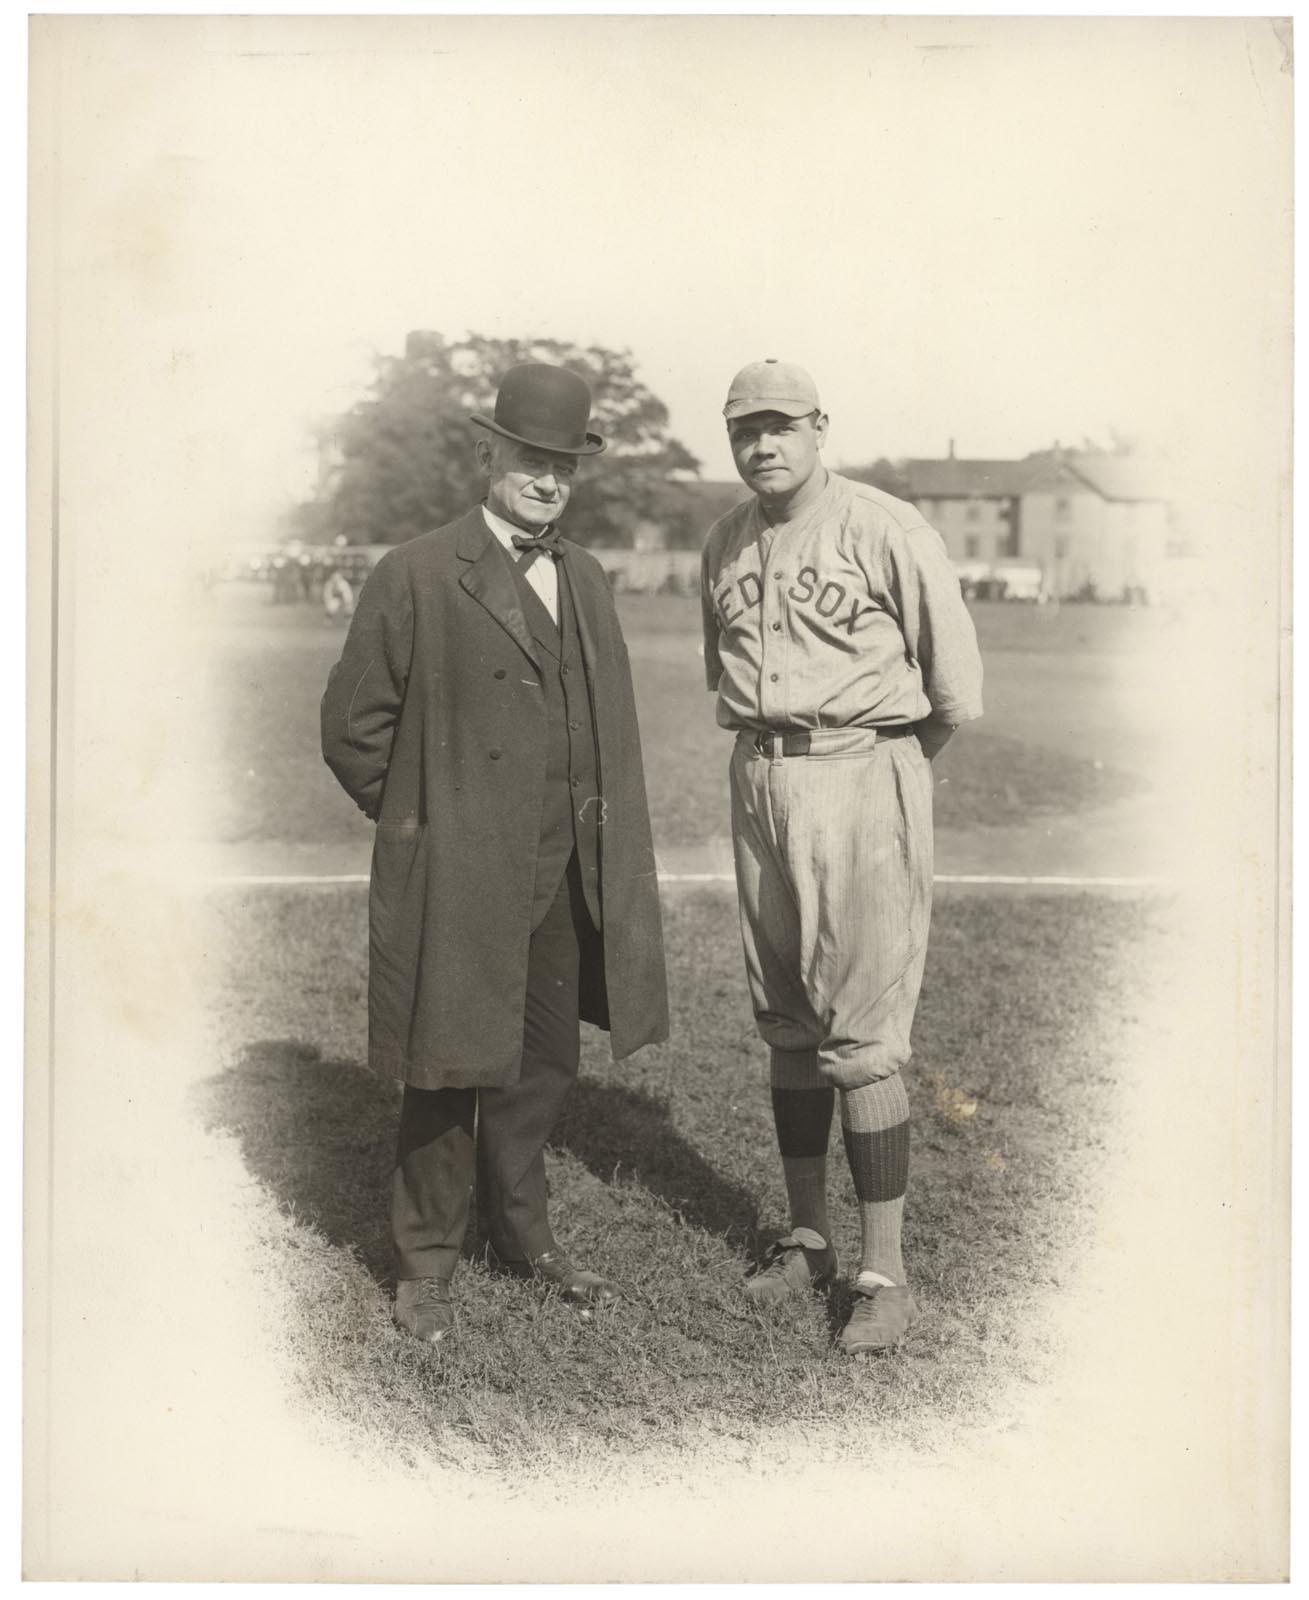 Ruth and Gehrig - Spectacular Babe Ruth "Rookie Era Type I "Portrait" w/Red Sox Owner Jimmy McAleer